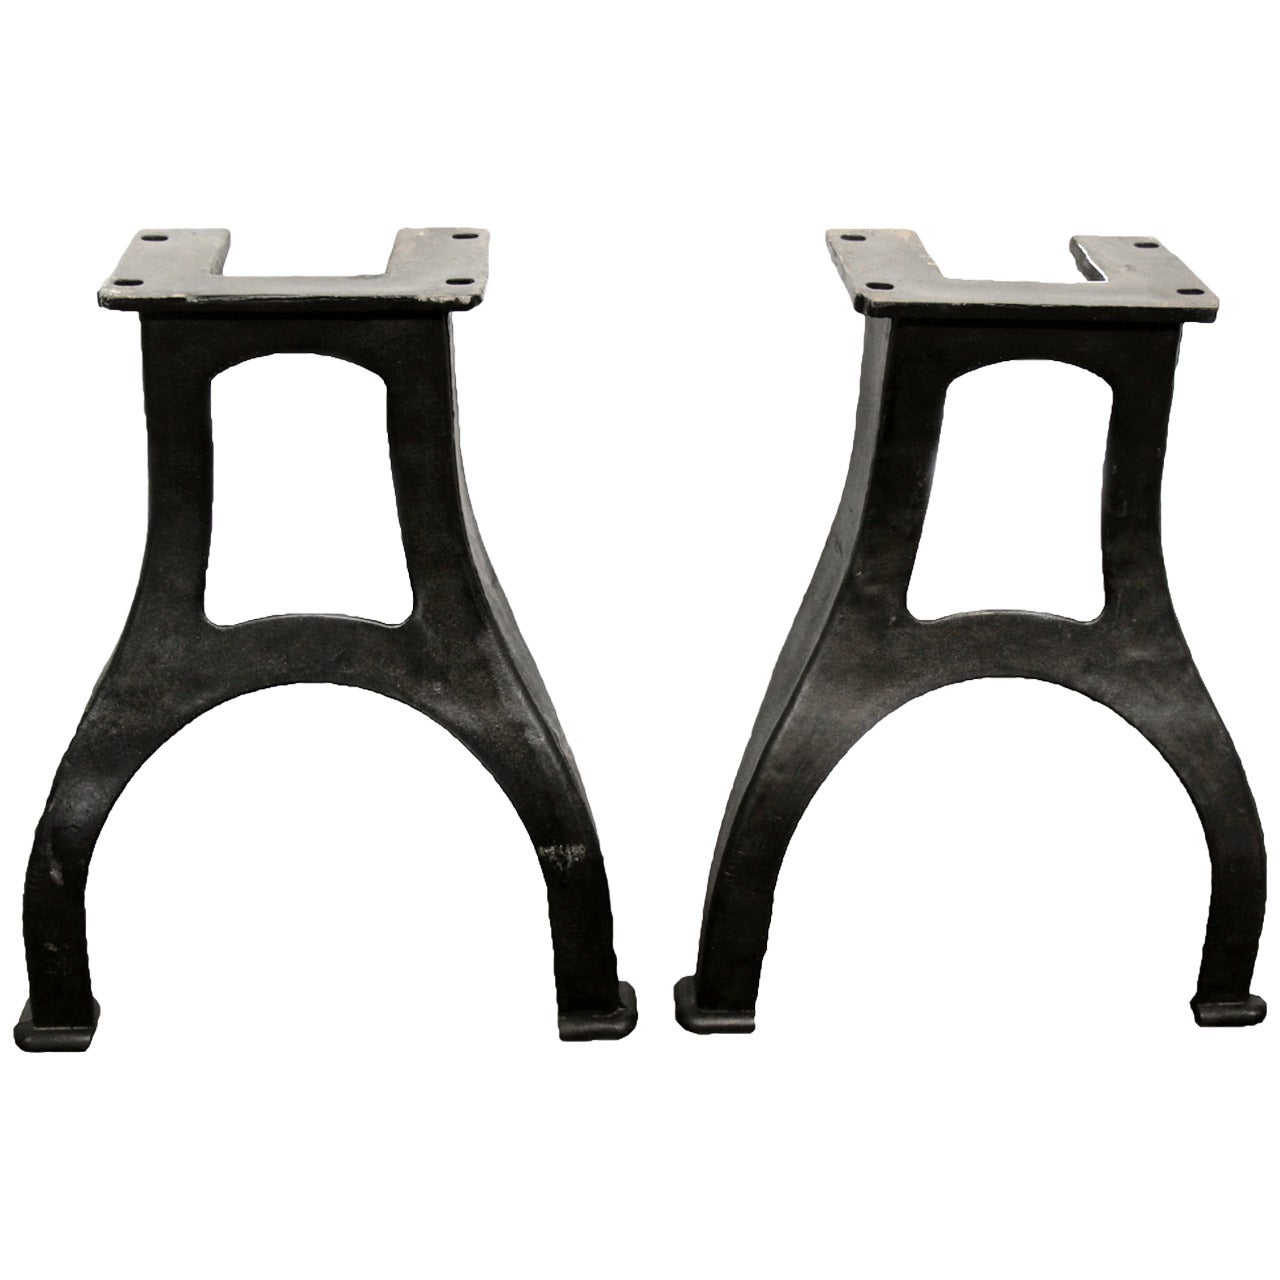 Pair of Curved Victorian Style Industrial Machine Cast Iron Table Legs